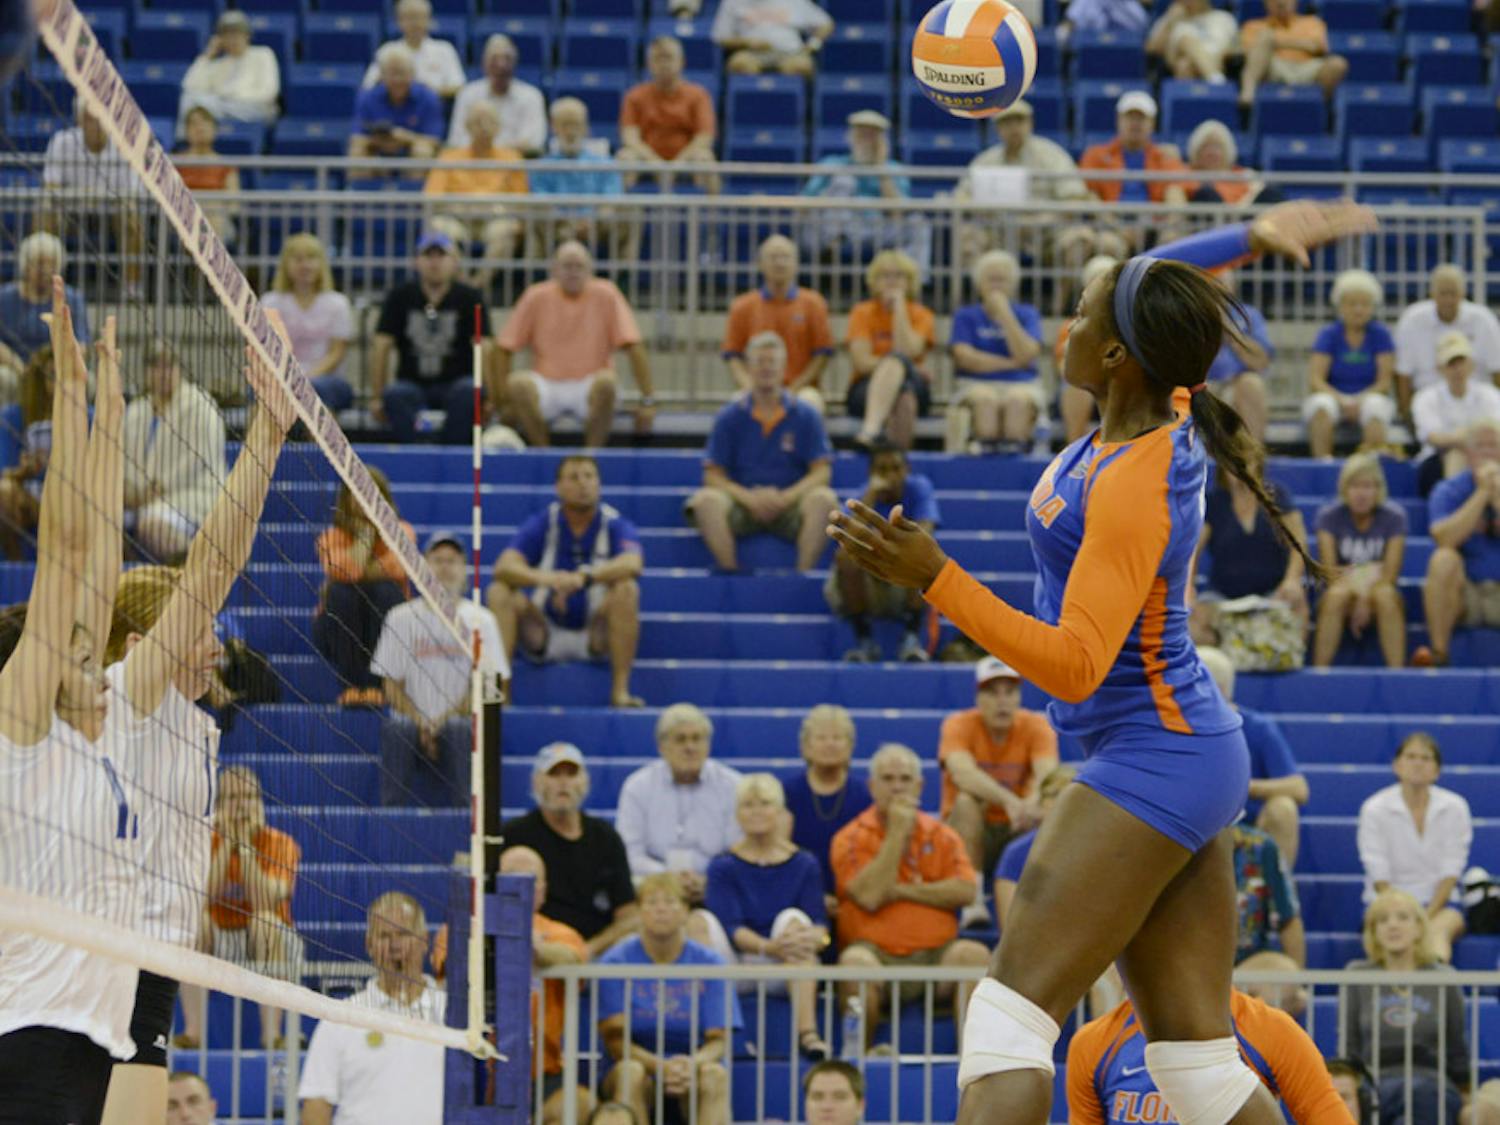 Simone Antwi jumps for the ball during Florida’s 3-0 victory against New Orleans on Aug. 30 in the O’Connell Center. UF is 5-1 this season.